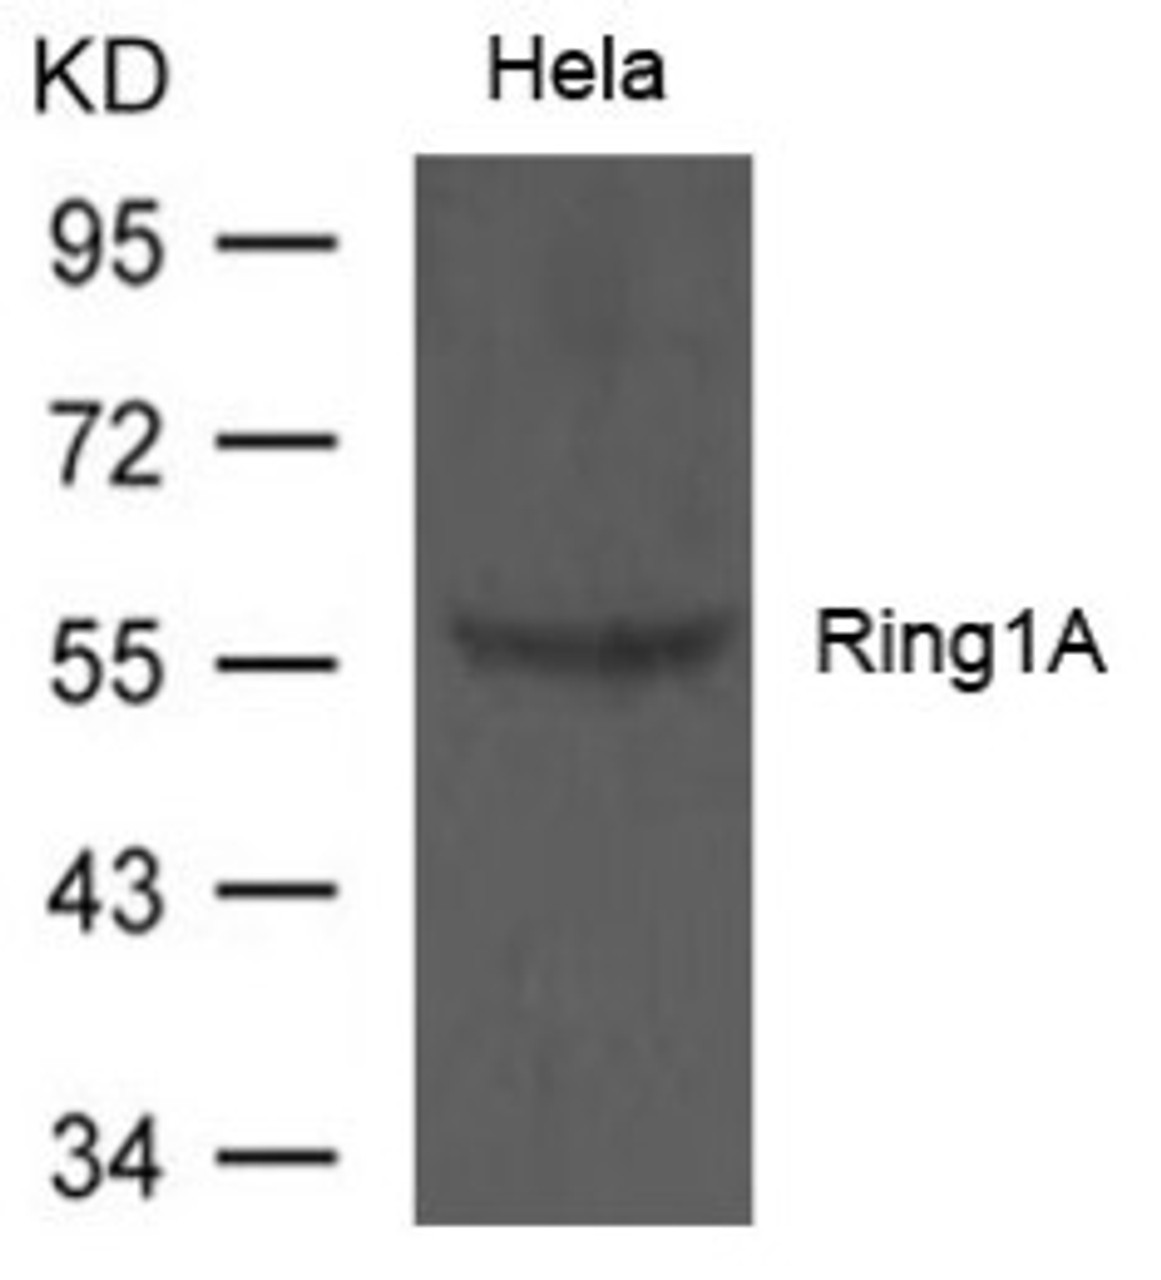 Western blot analysis of extract from HeLa cells using Ring1A Antibody.